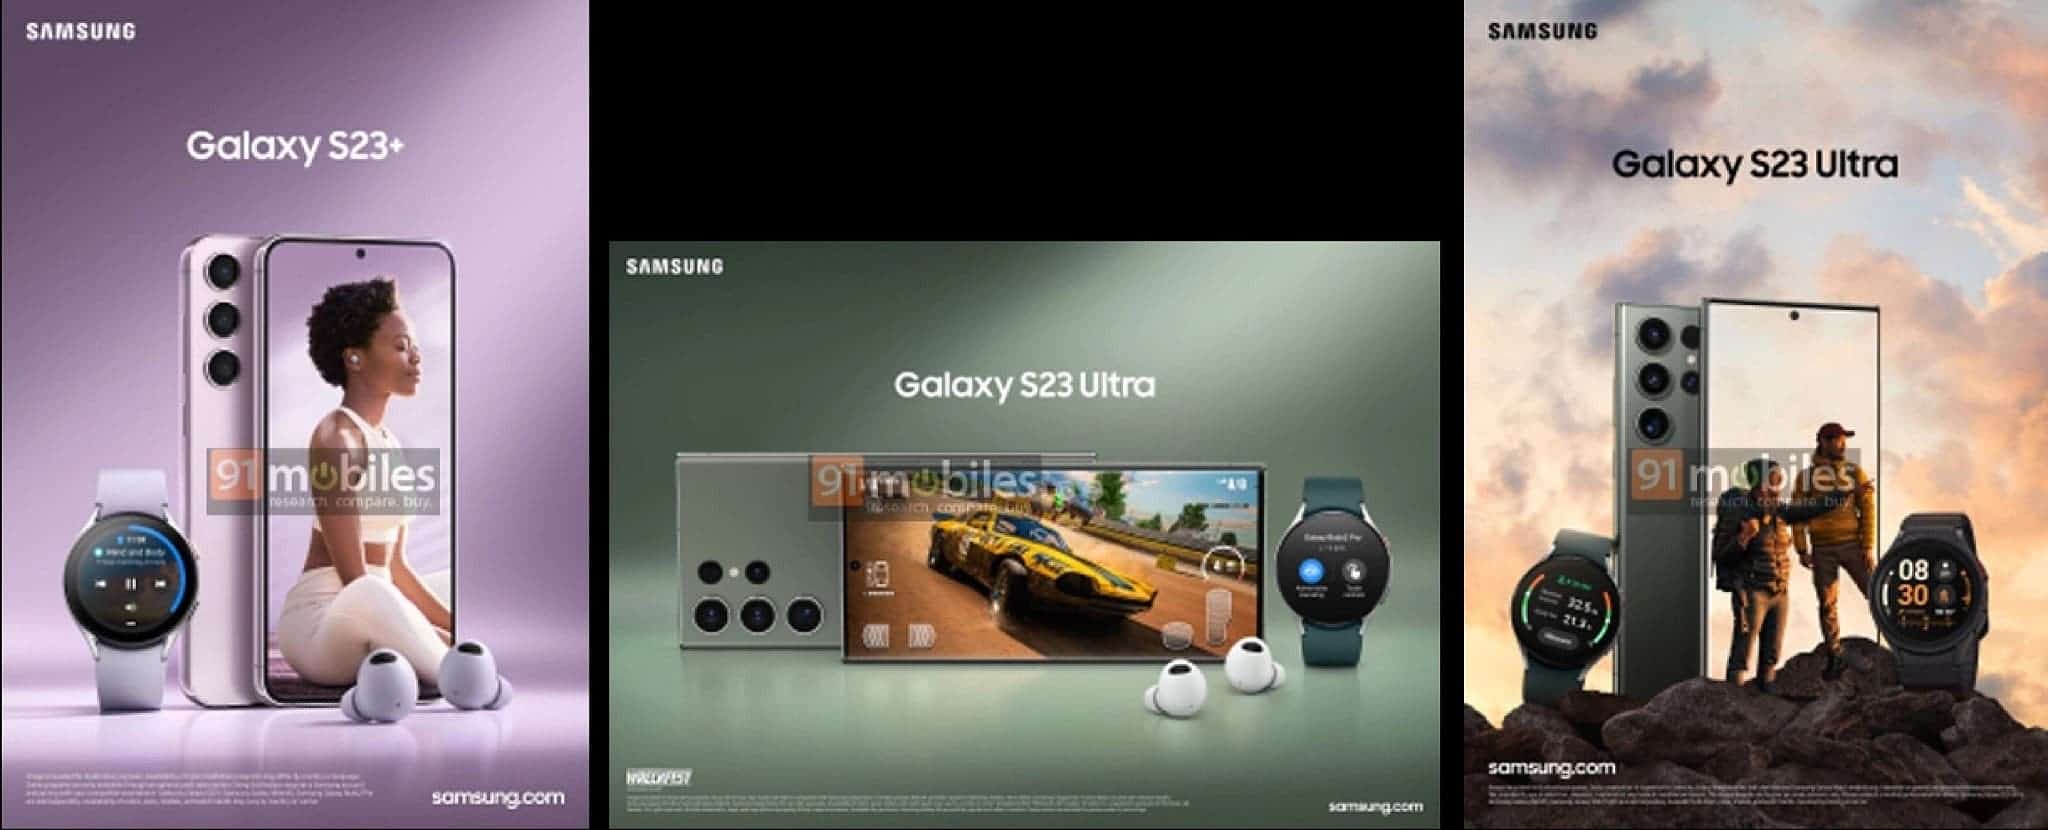 Galaxy S23 leaked promo images